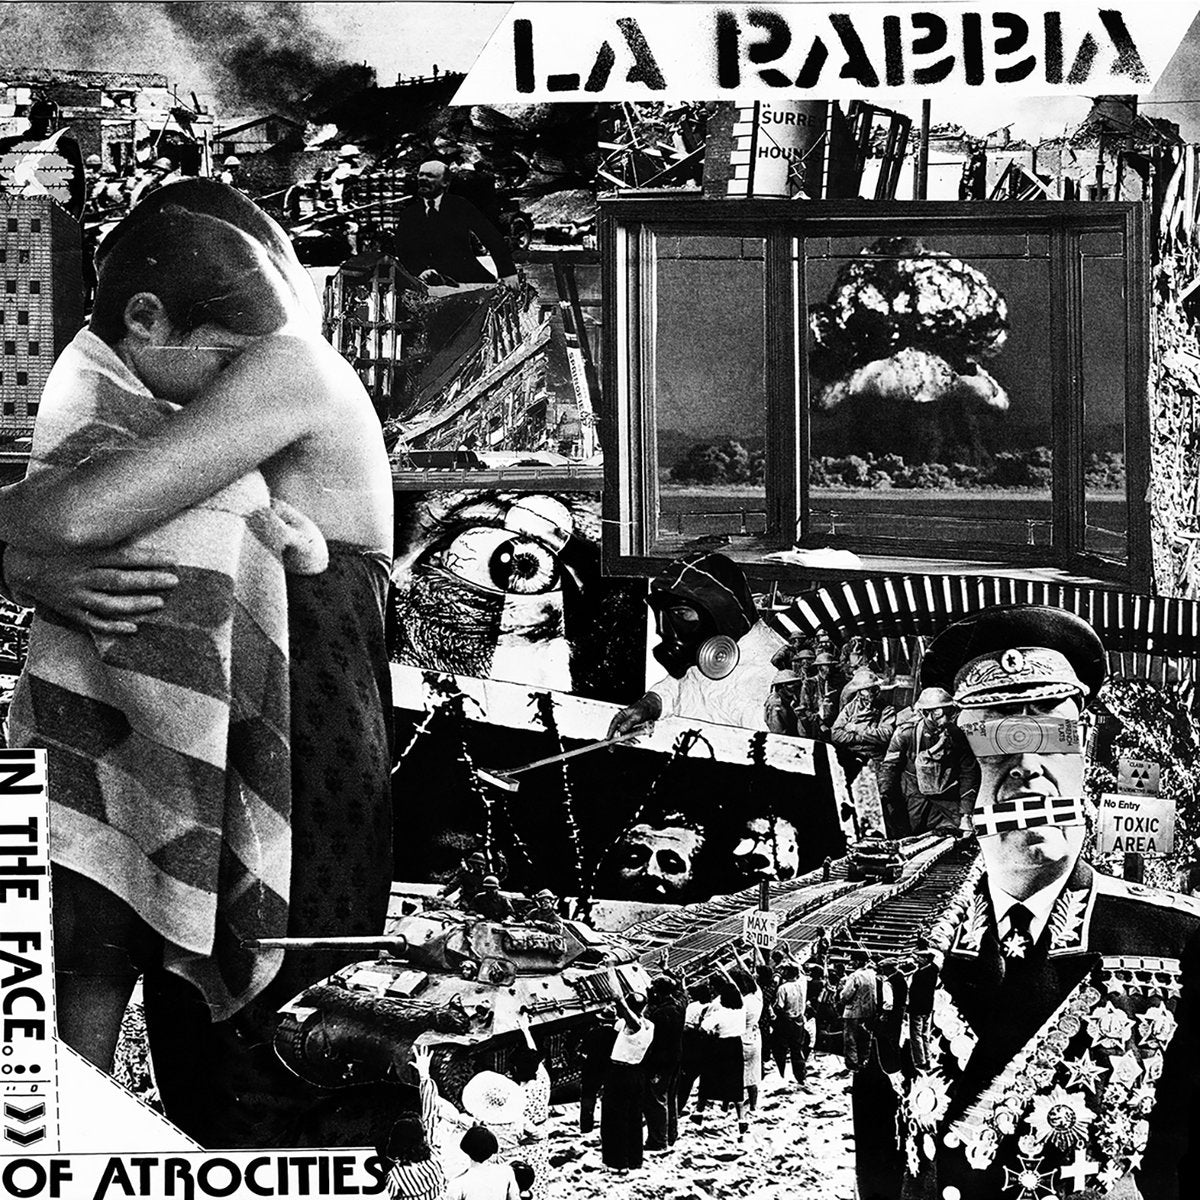 La Rabbia- In The Face Of Atrocities LP ~EX GAGGERS W/ FOLD OUT LYRICS SHEET POSTER!